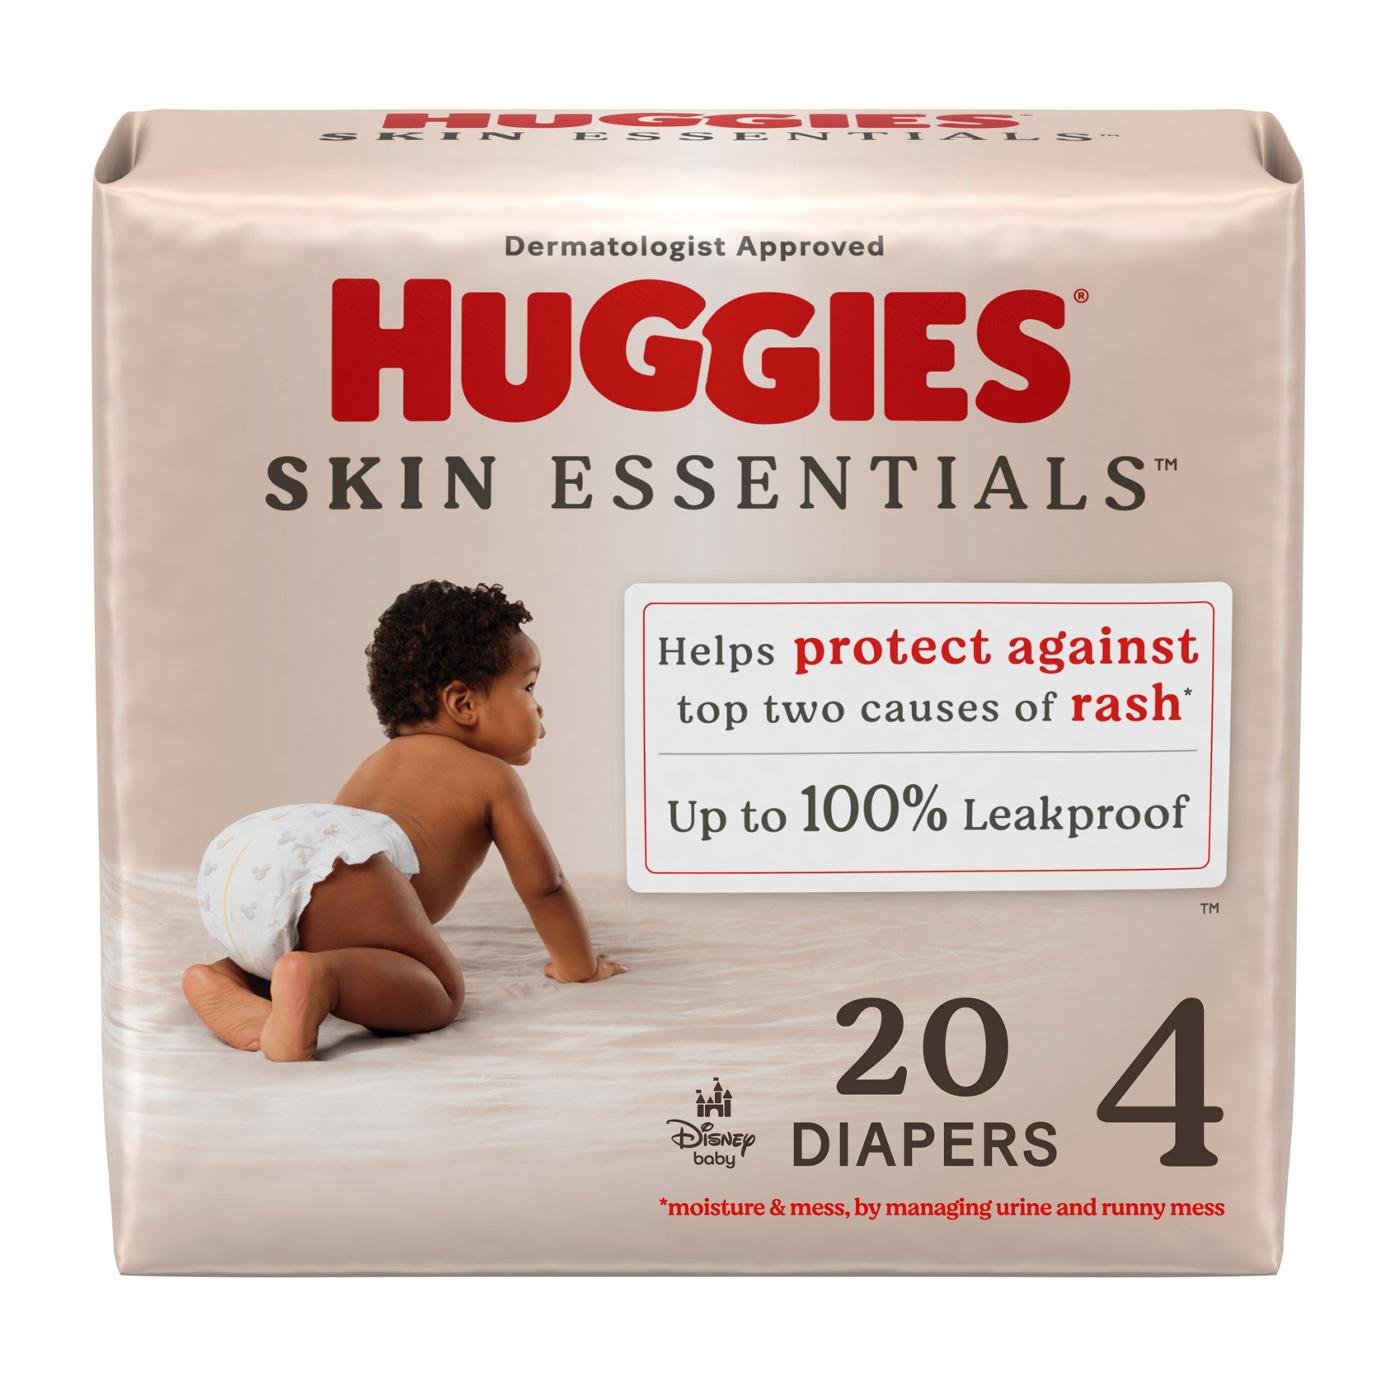 Huggies Skin Essentials Baby Diapers - Size 4; image 1 of 5